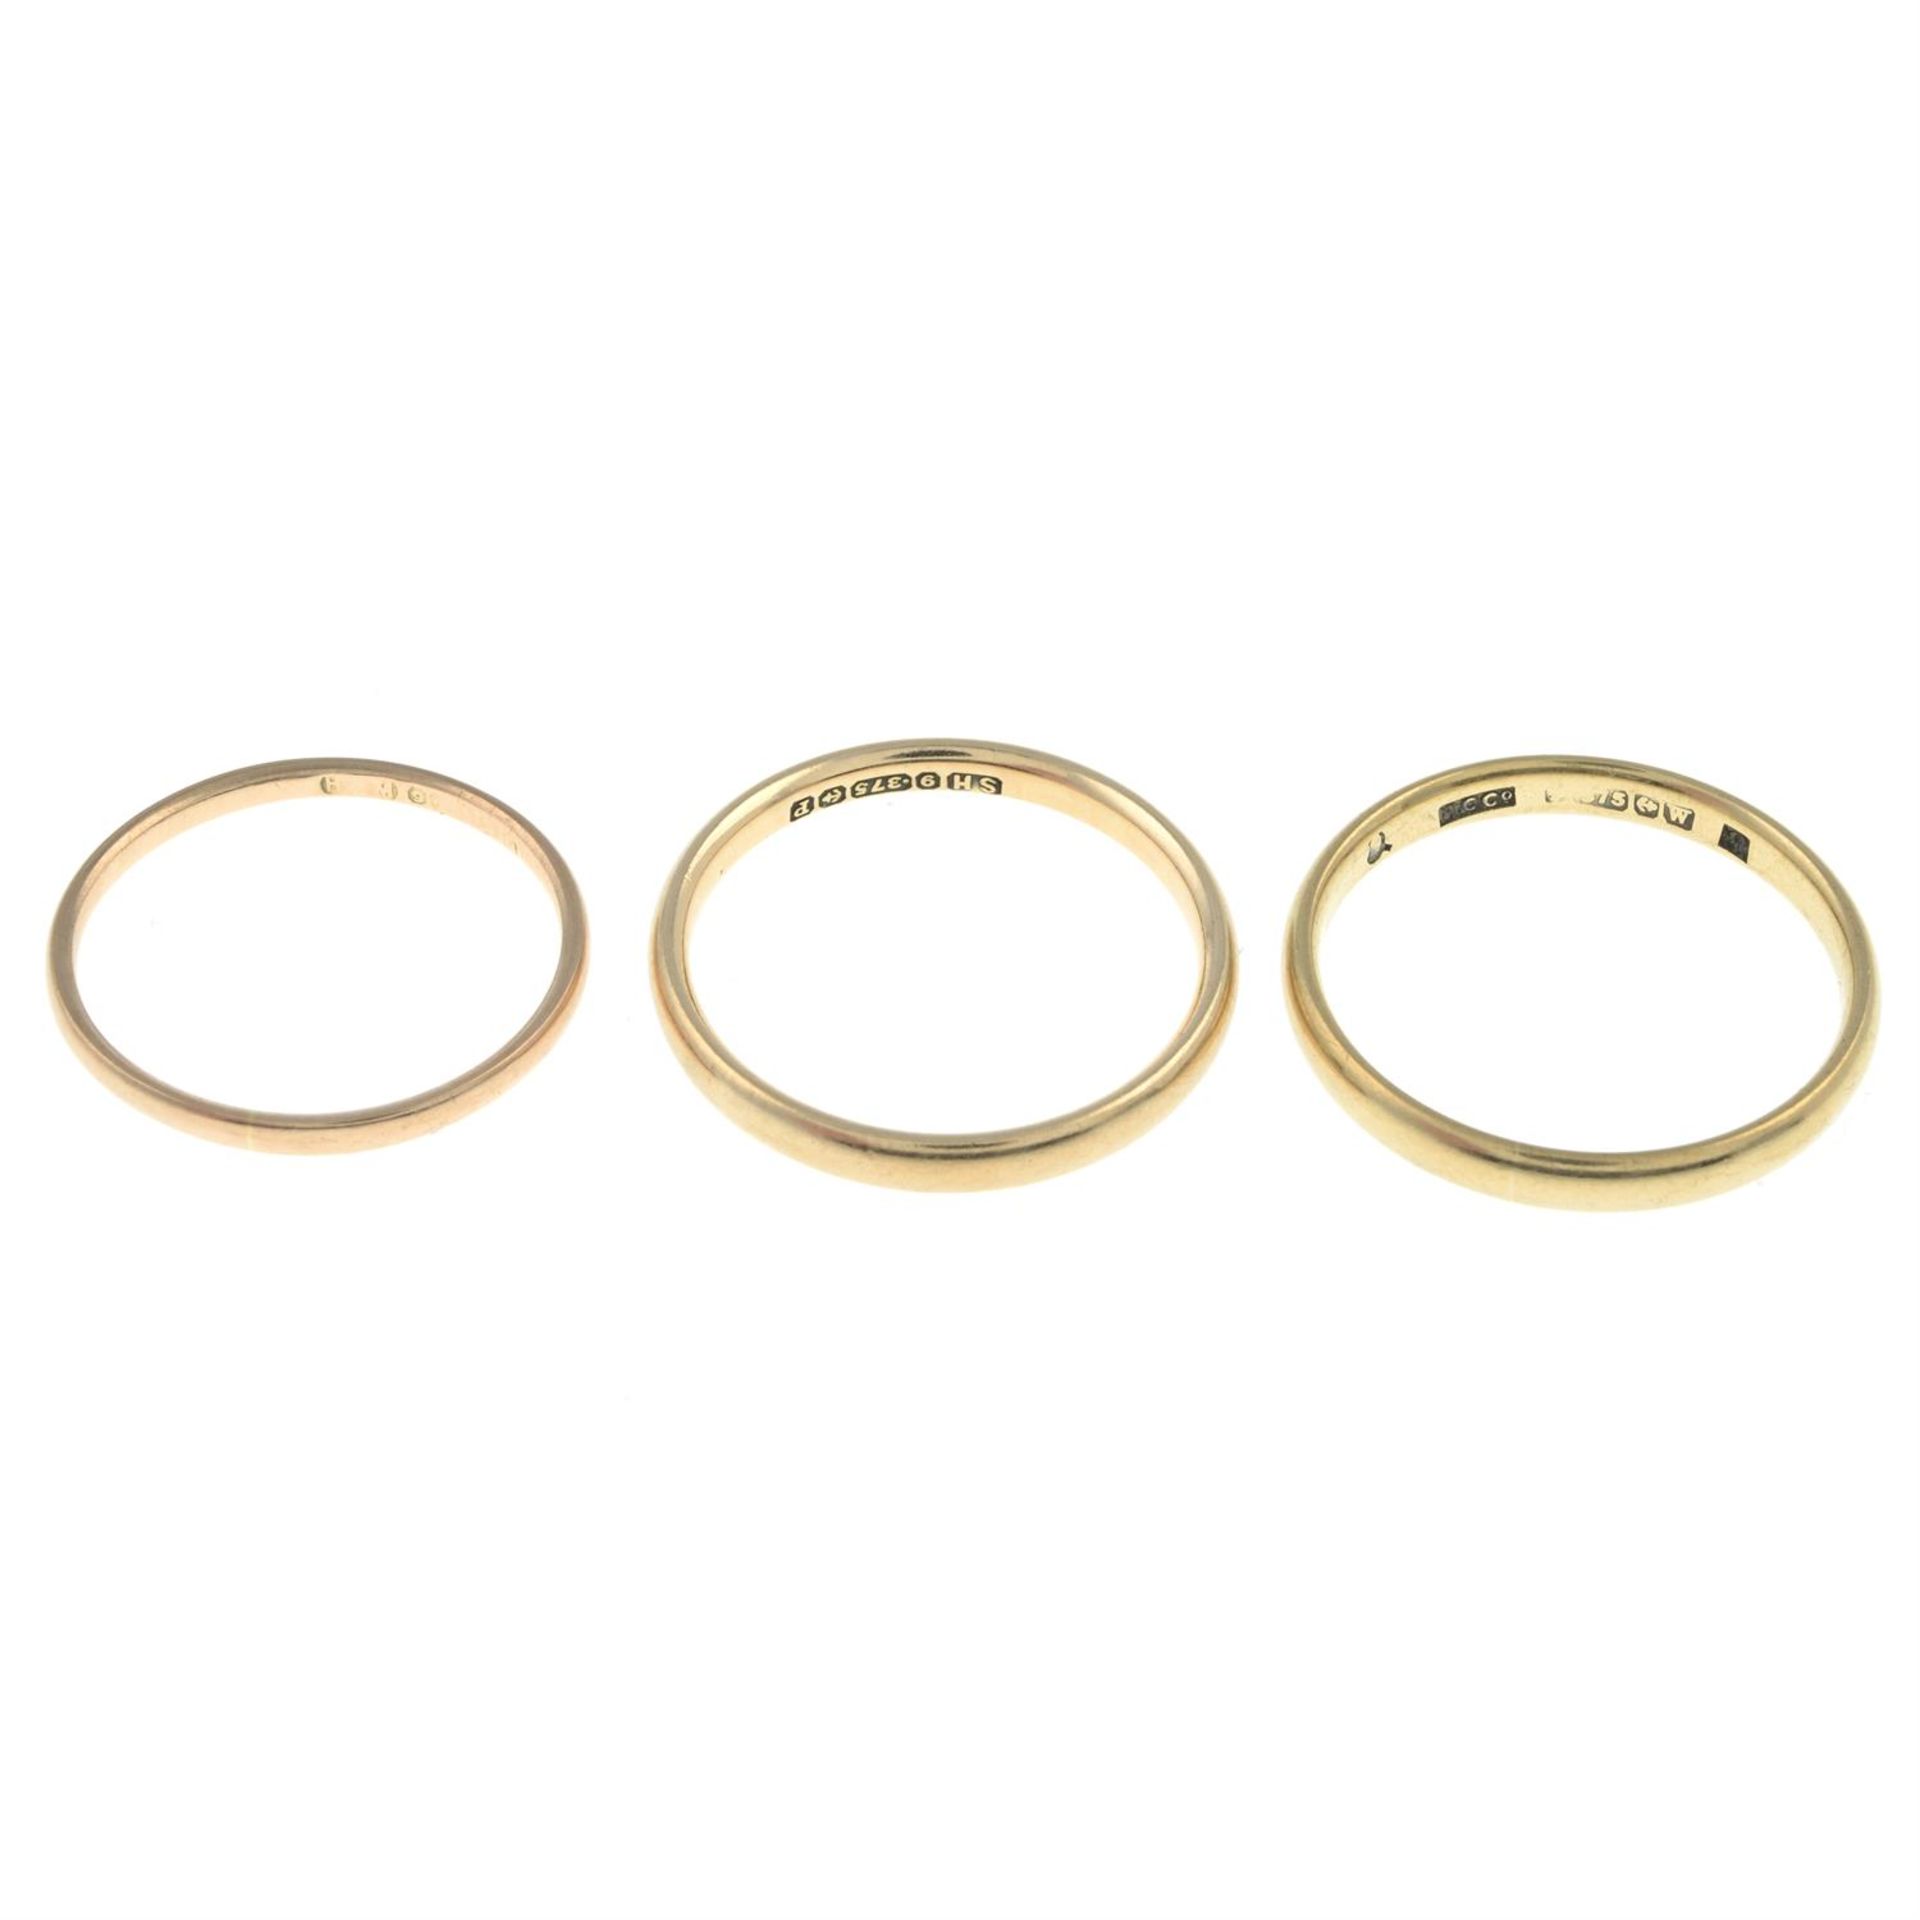 Three mostly 9ct band rings - Image 2 of 2